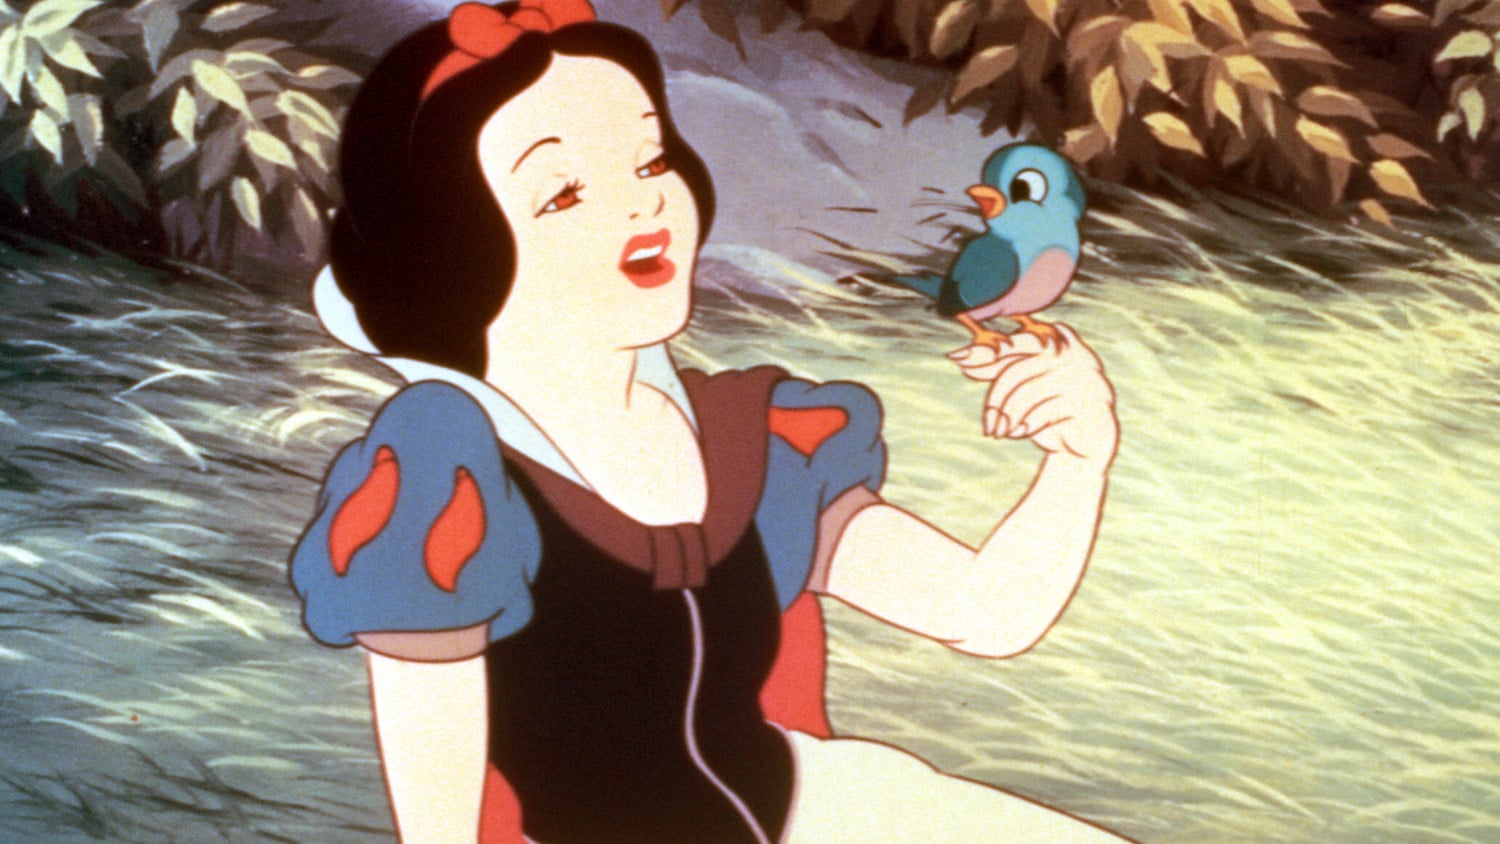 Snow White Coming To Disney+ In Restored Version